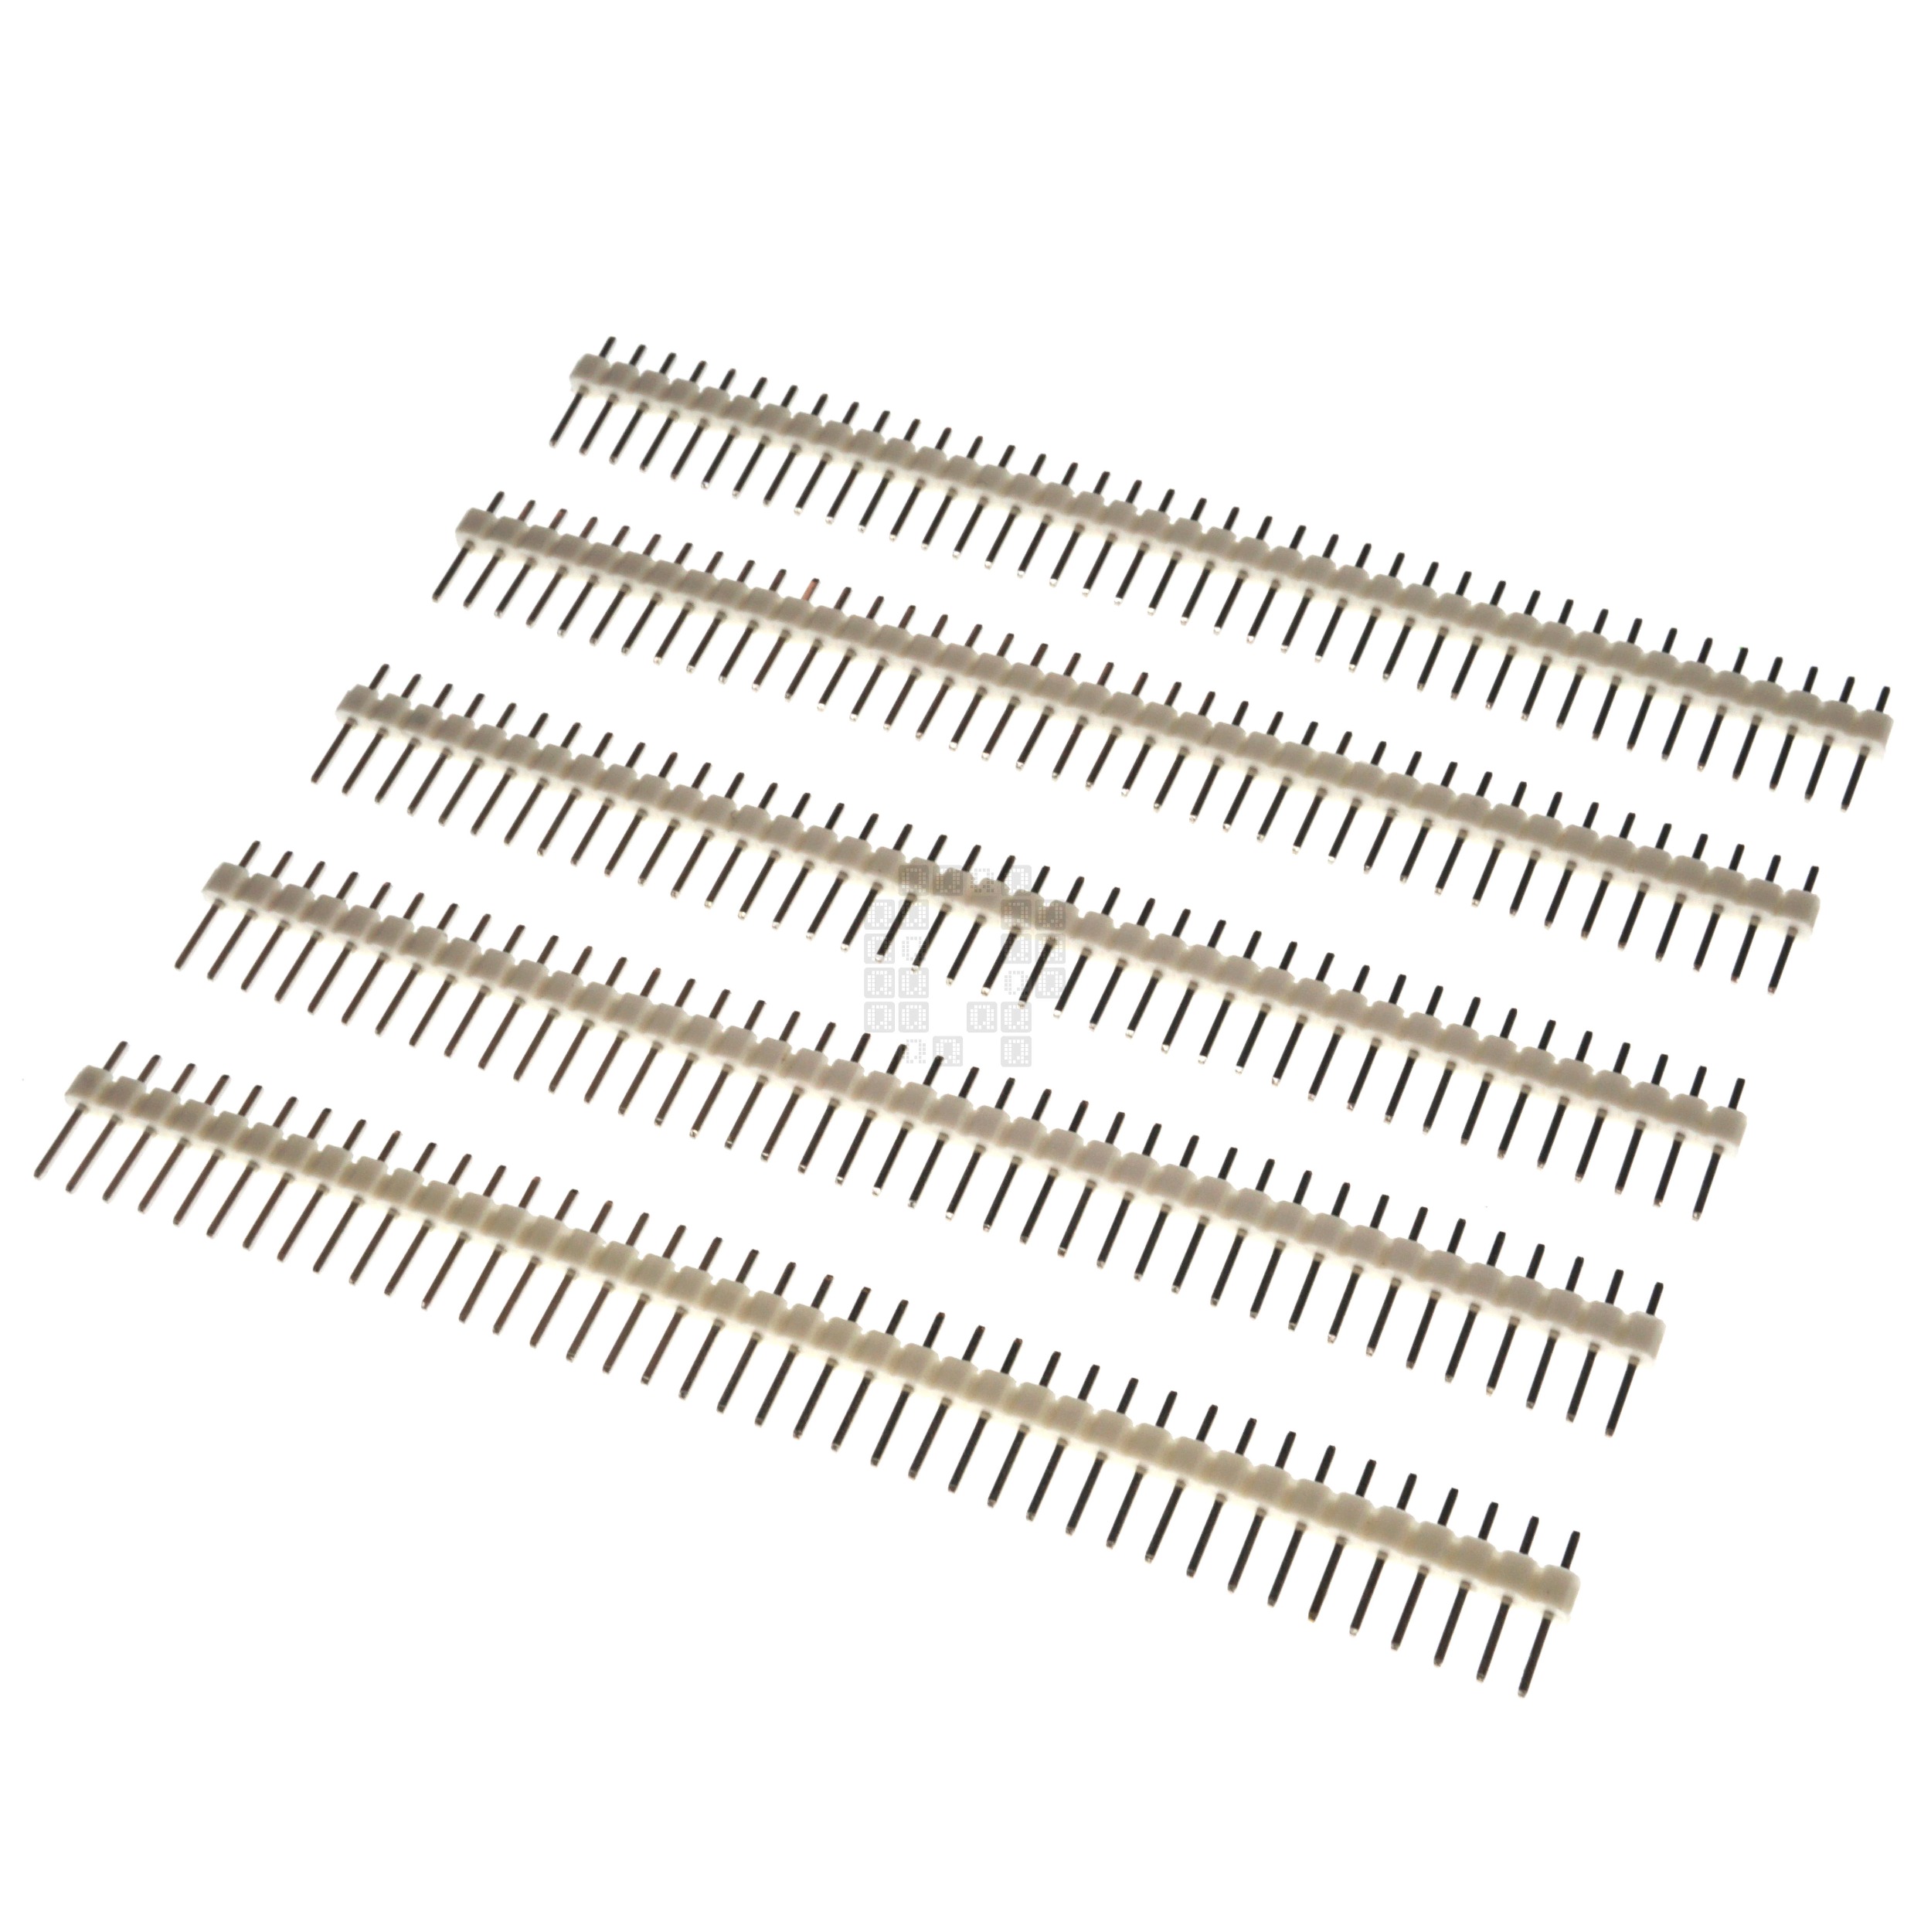 1x40 Pin Male Breakable Single Row Pin Header, 2.54mm Pitch, 11.2mm Height, 5-Pack, White